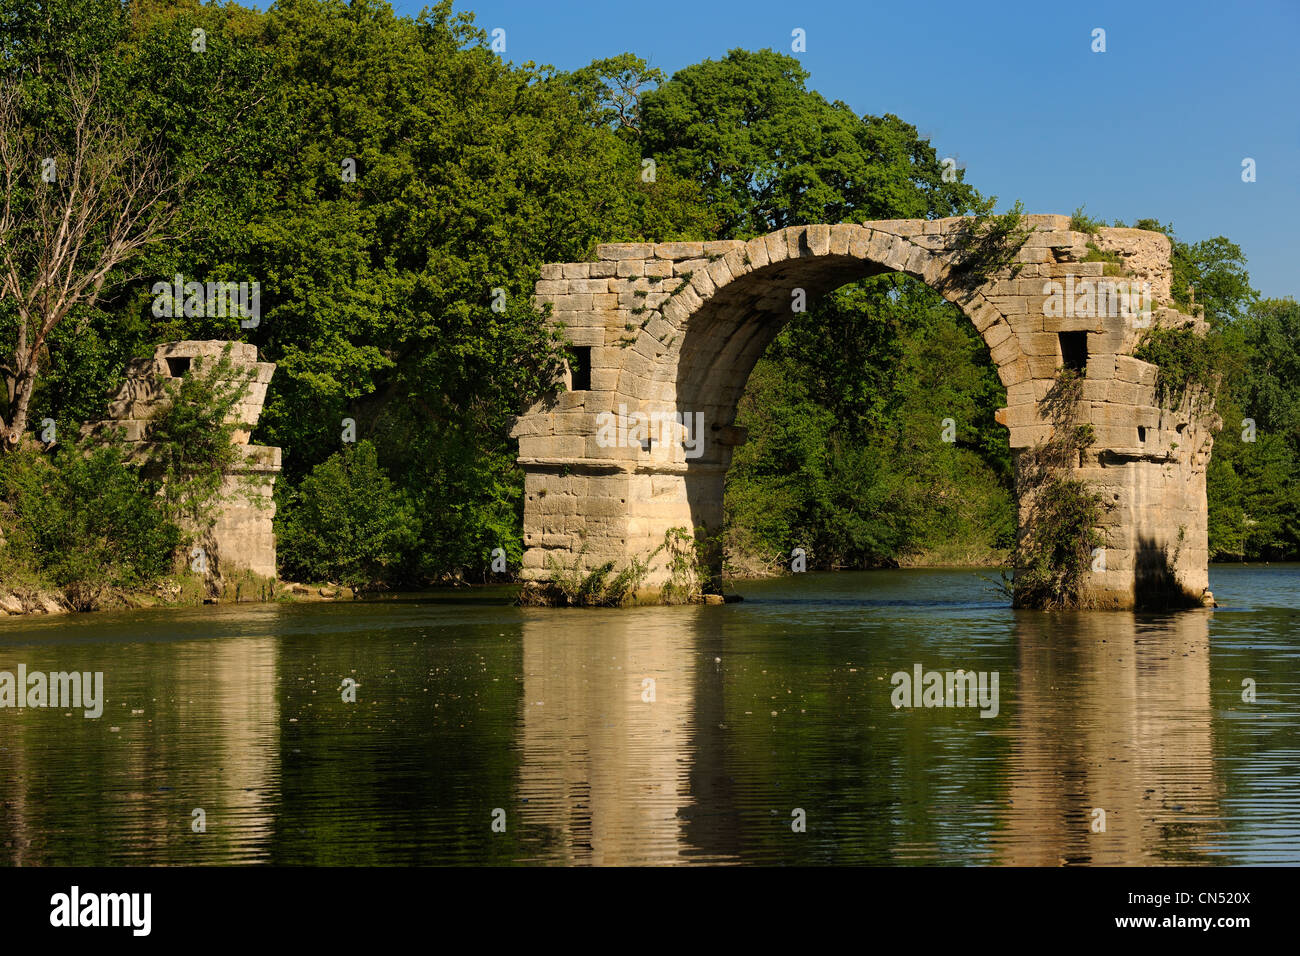 France, Herault, near Lunel, Oppidum of Ambrussum on the Via Domitia, the Pont Ambroix (Ambroix bridge) on the river Vidourle Stock Photo